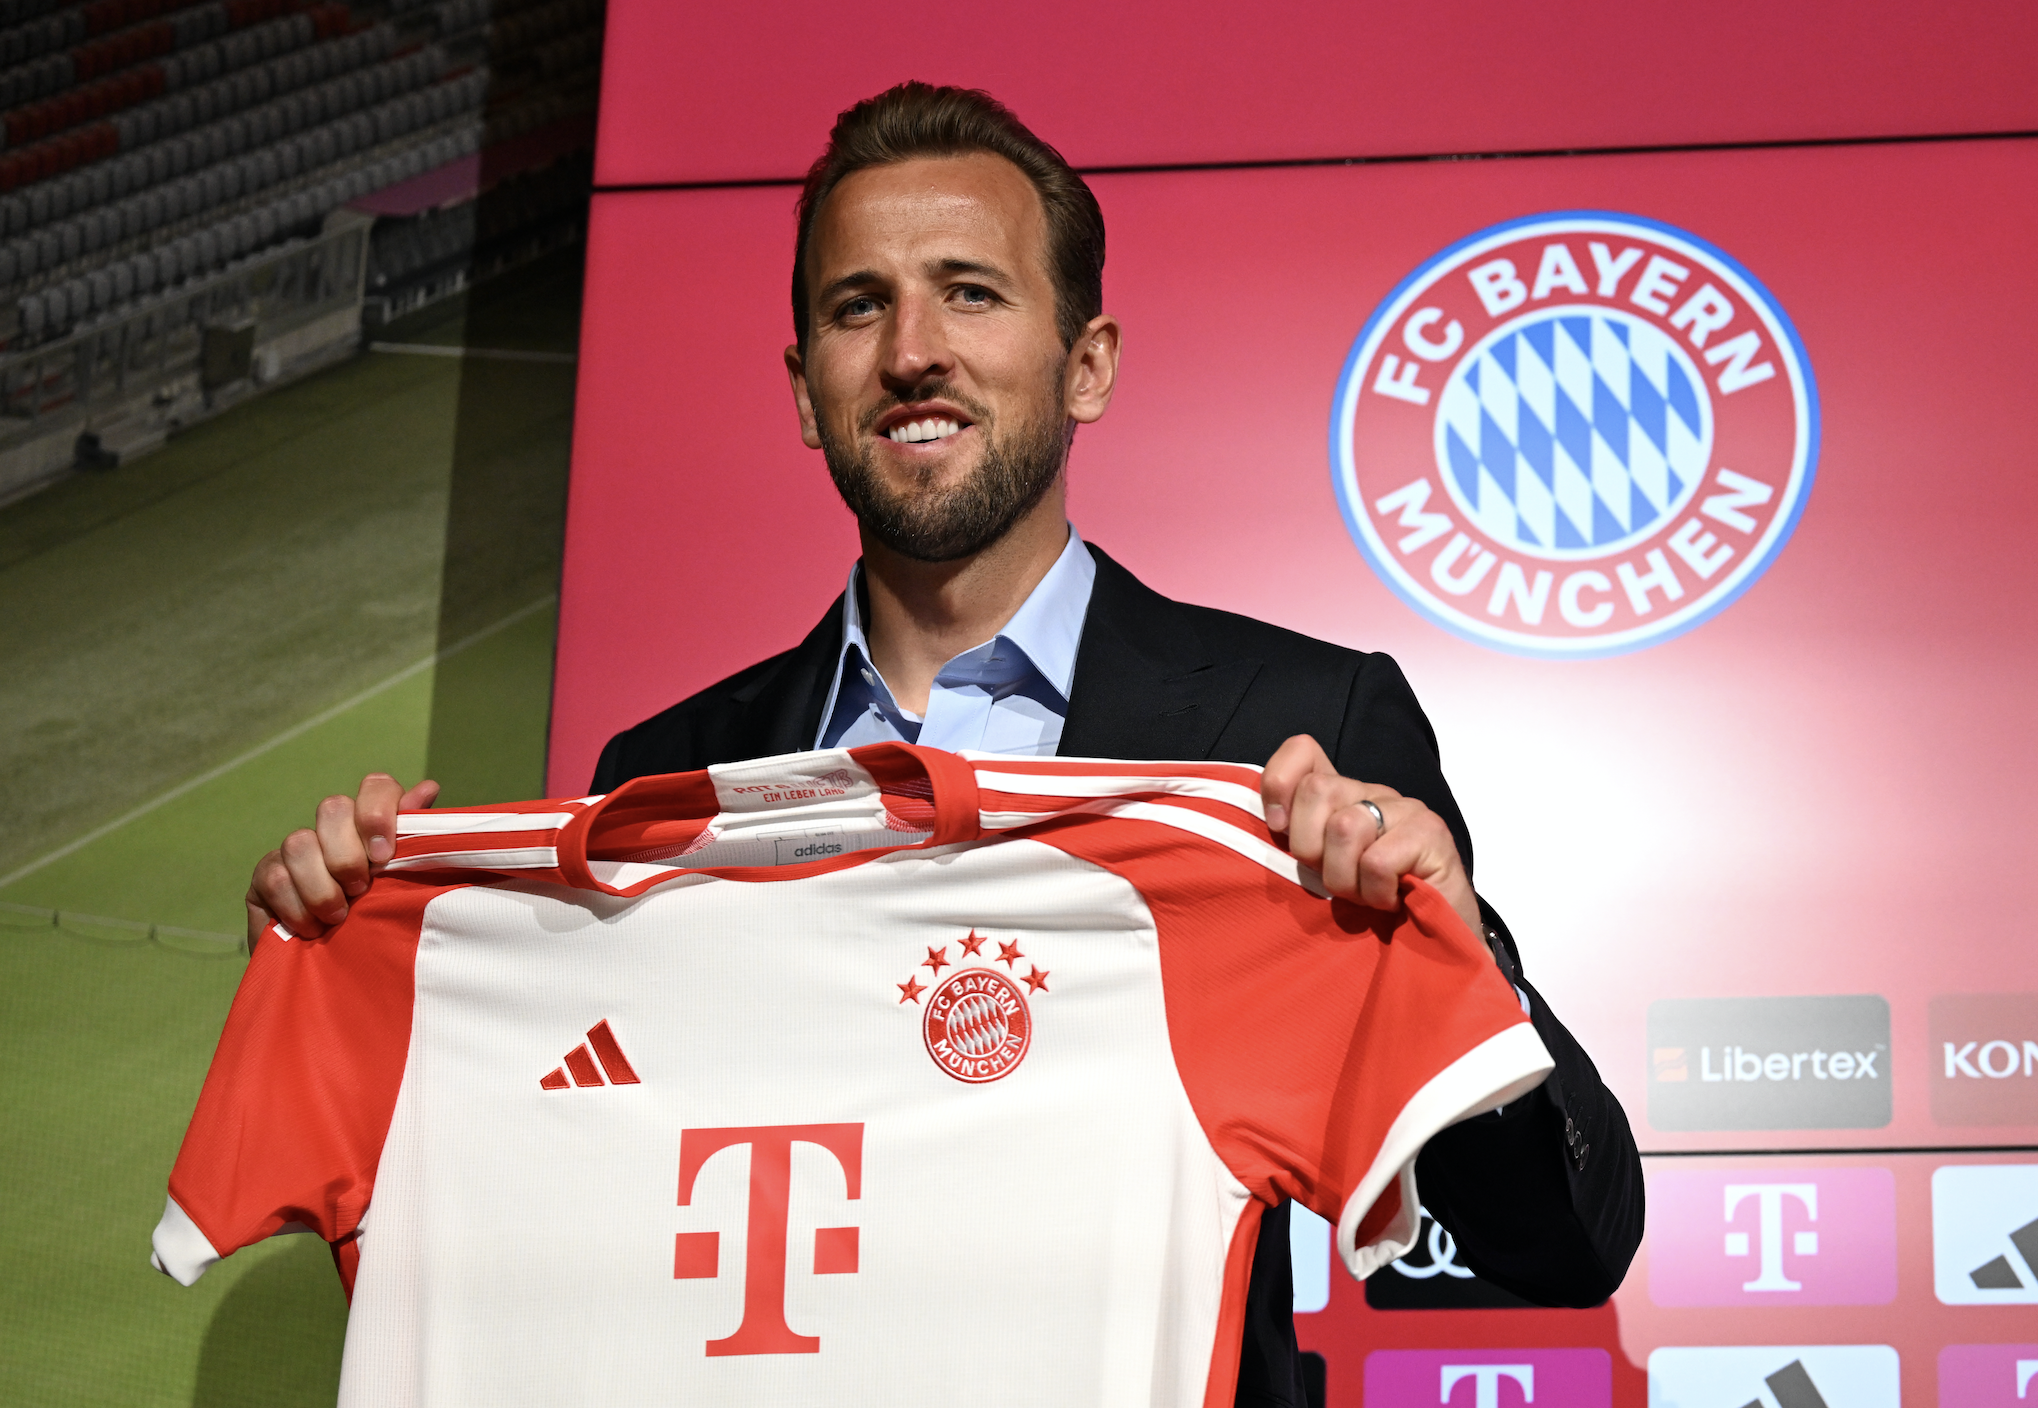 Kane: I came to Bayern to feel pressure to win titles